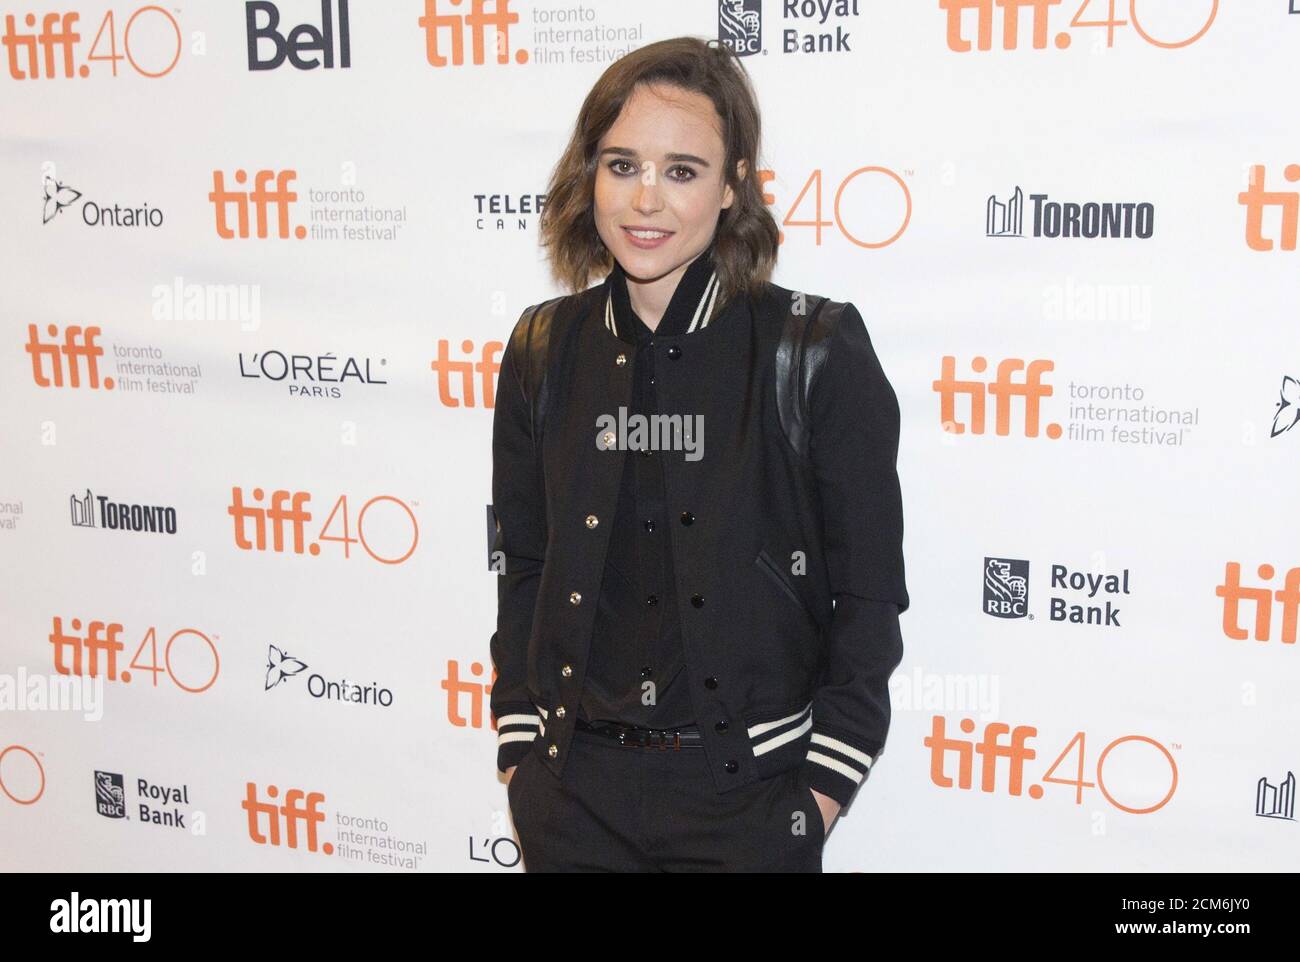 Ellen Page arrives on the red carpet for the film 'Into the Forest' during the 40th Toronto International Film Festival in Toronto, Canada, September 12, 2015. TIFF runs from September 10-20.   REUTERS/Mark Blinch Stock Photo